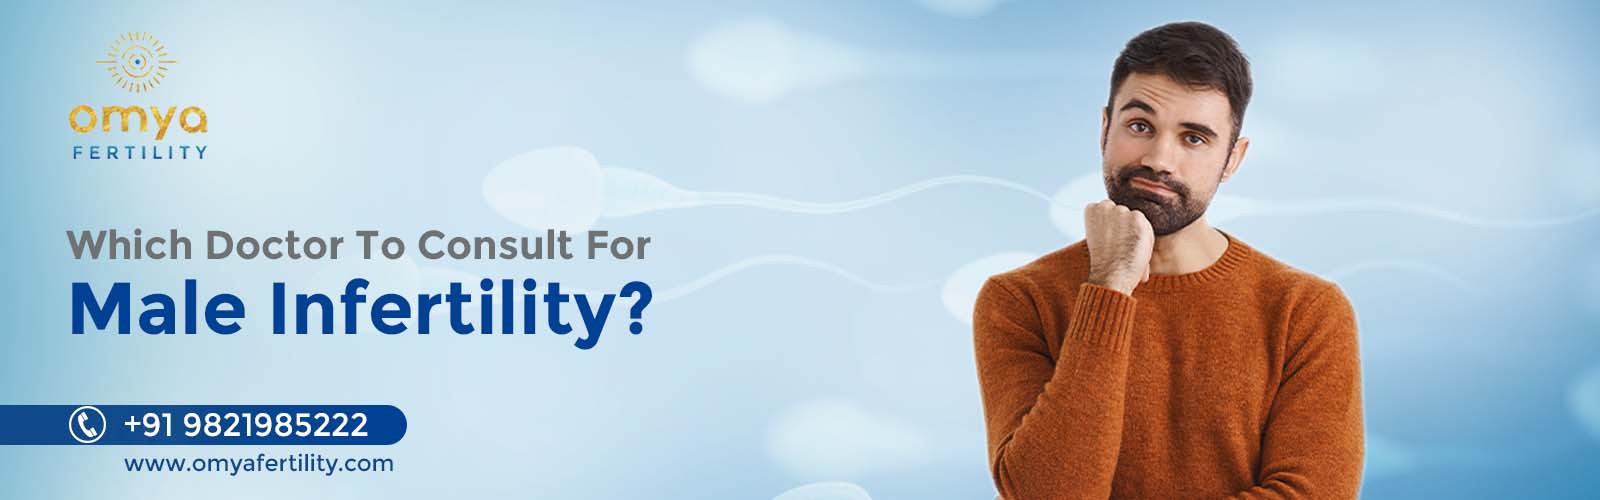 Male Infertility Doctor: Which Doctor to Consult for Male Infertility in Delhi